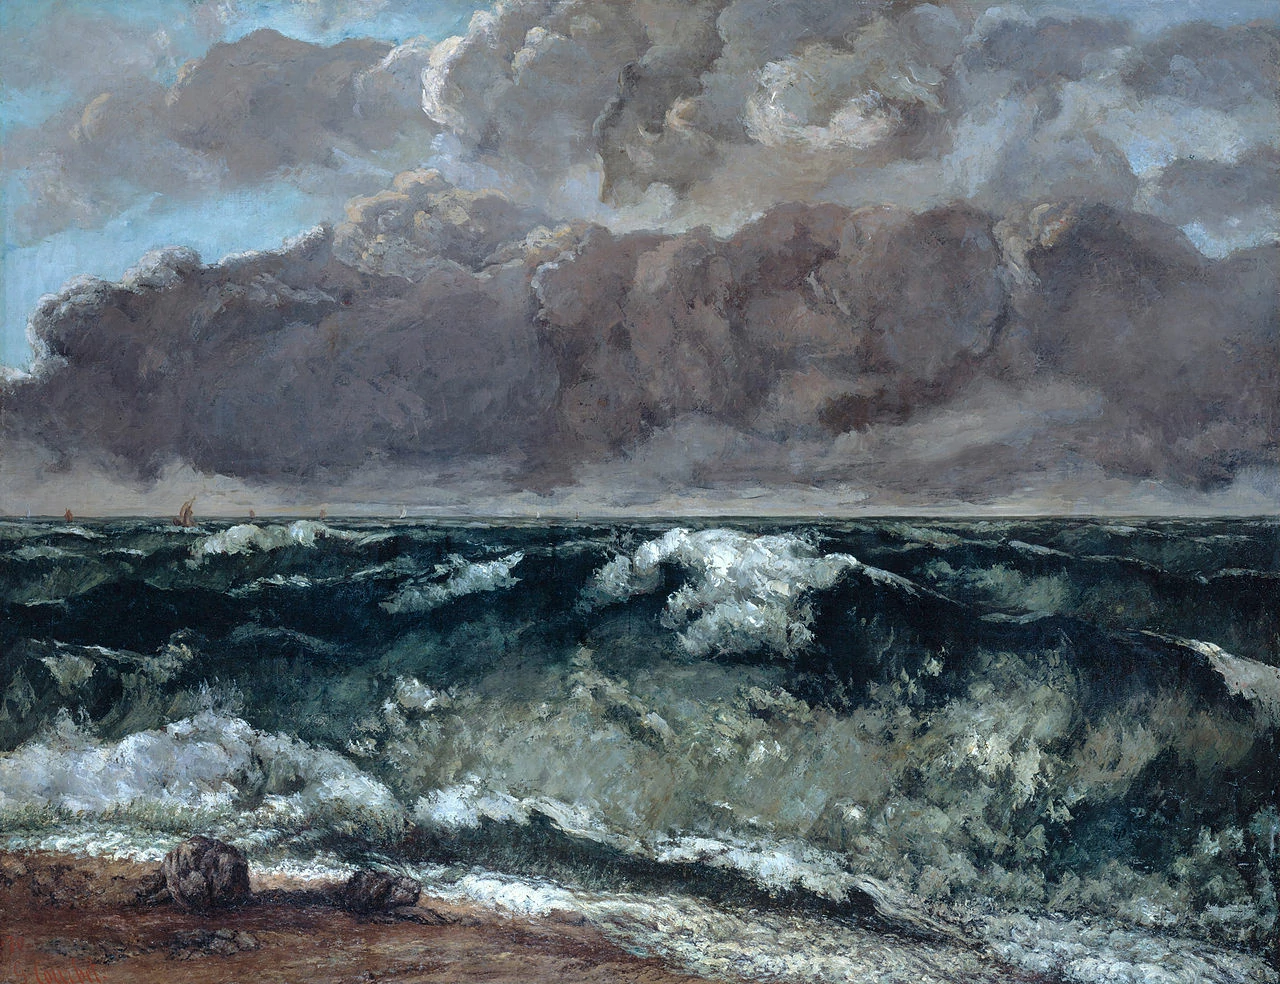 The Wave, Gustave Courbet